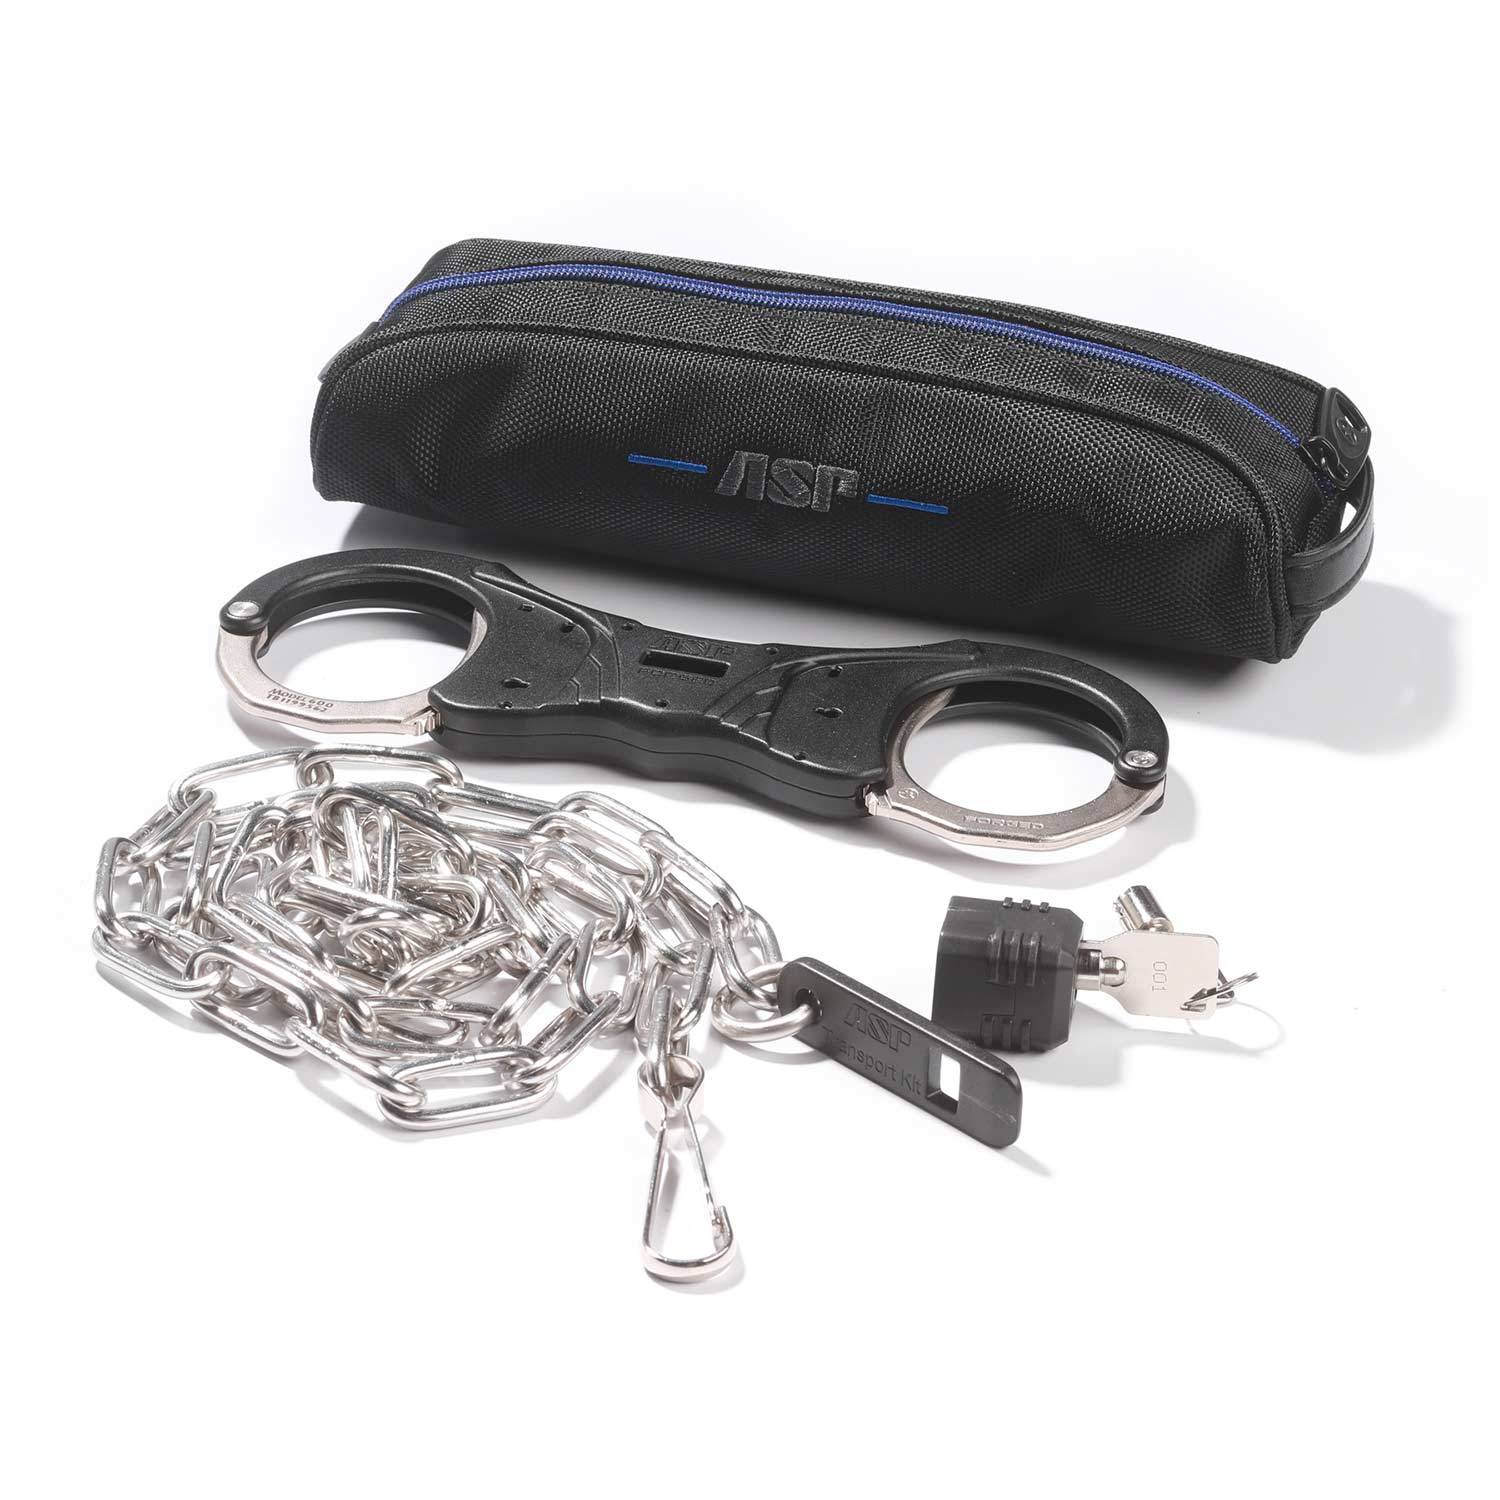 ASP Transport Kit with Rigid Ultra Cuffs and Chain